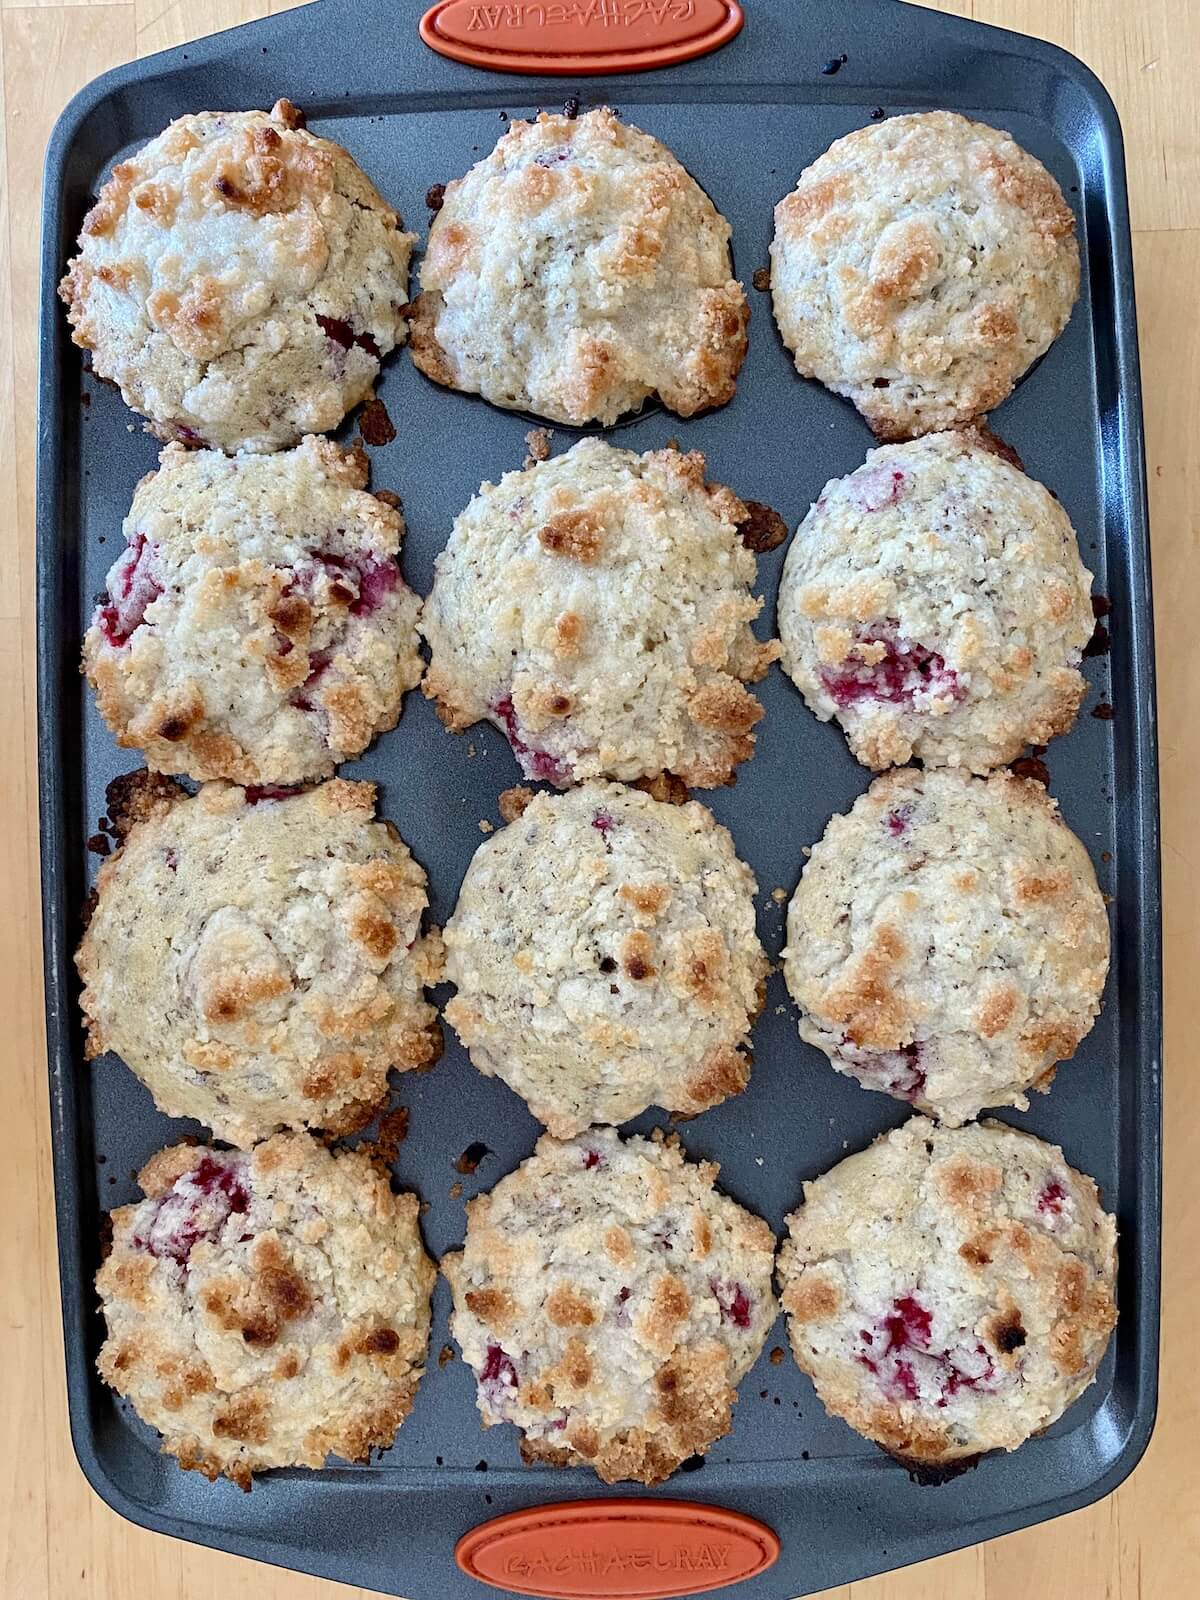 A 12-cup muffin tray with 12 baked raspberry vegan muffins.